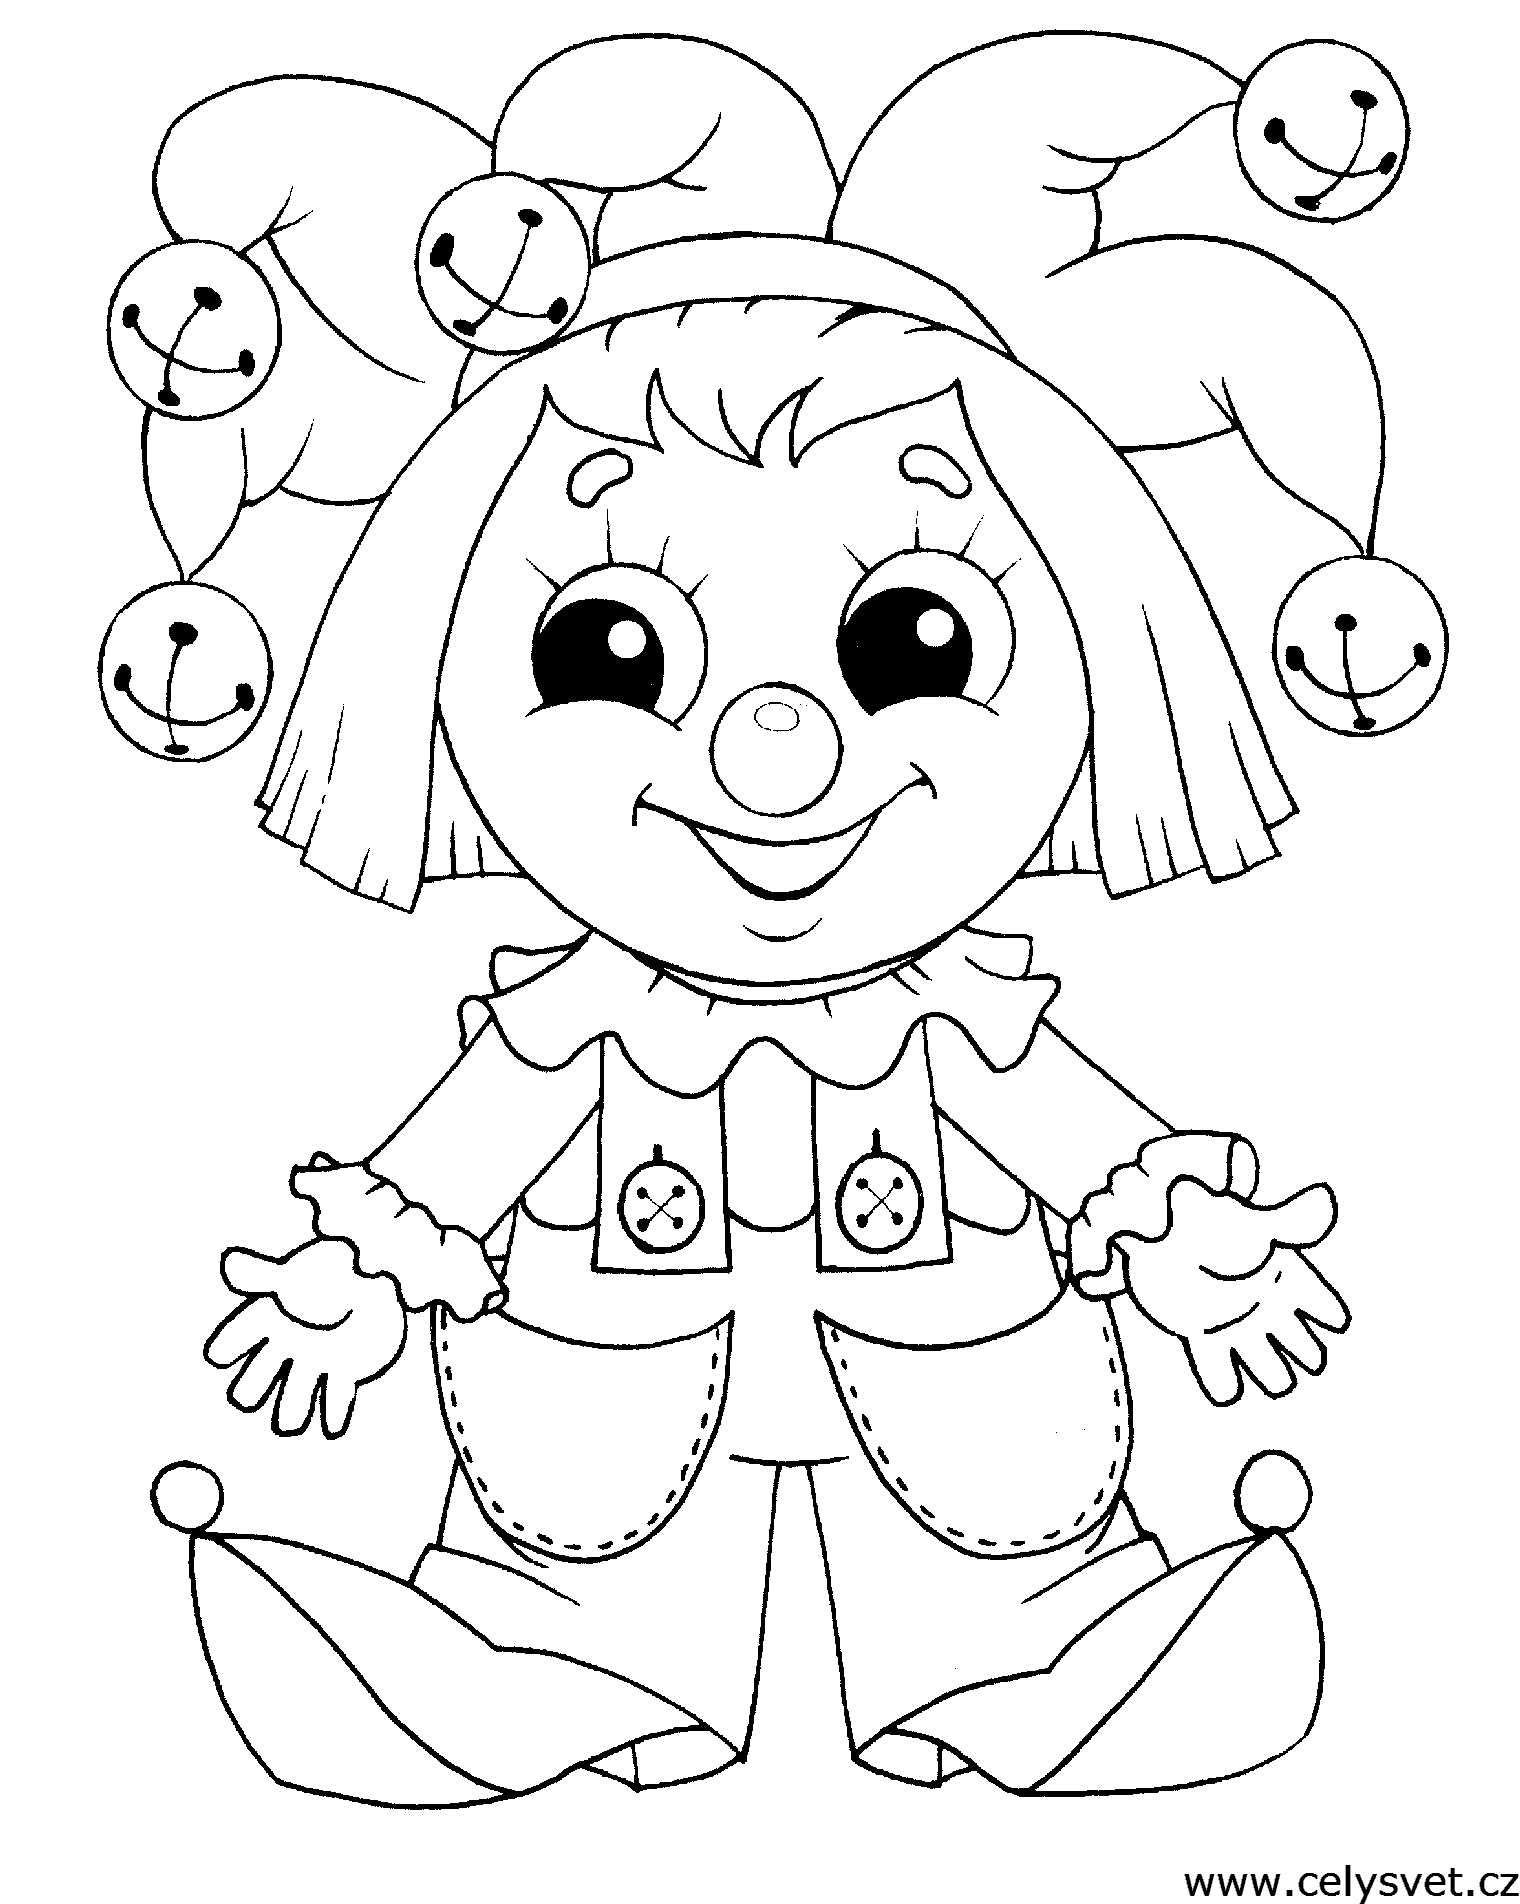 Human Skin coloring page | Free Printable Coloring Pages